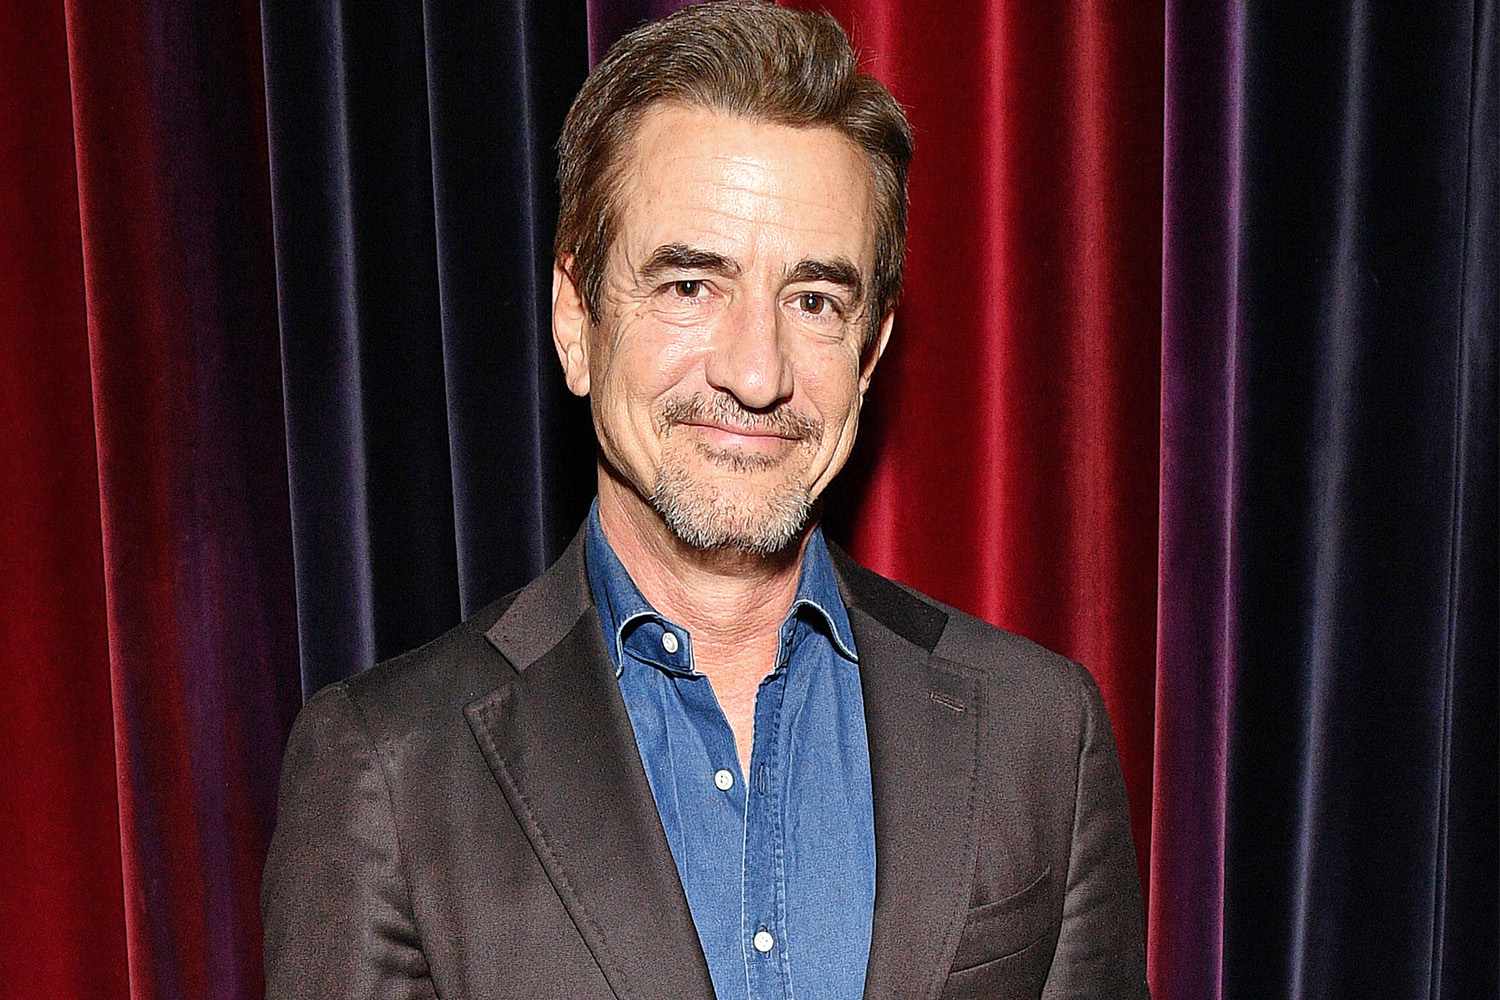 NEW YORK, NEW YORK - FEBRUARY 24: Dermot Mulroney attends the "Greed" after party hosted by Sony Pictures Classics & The Cinema Society at The Fleur Room on February 24, 2020 in New York City. (Photo by Dia Dipasupil/WireImage)